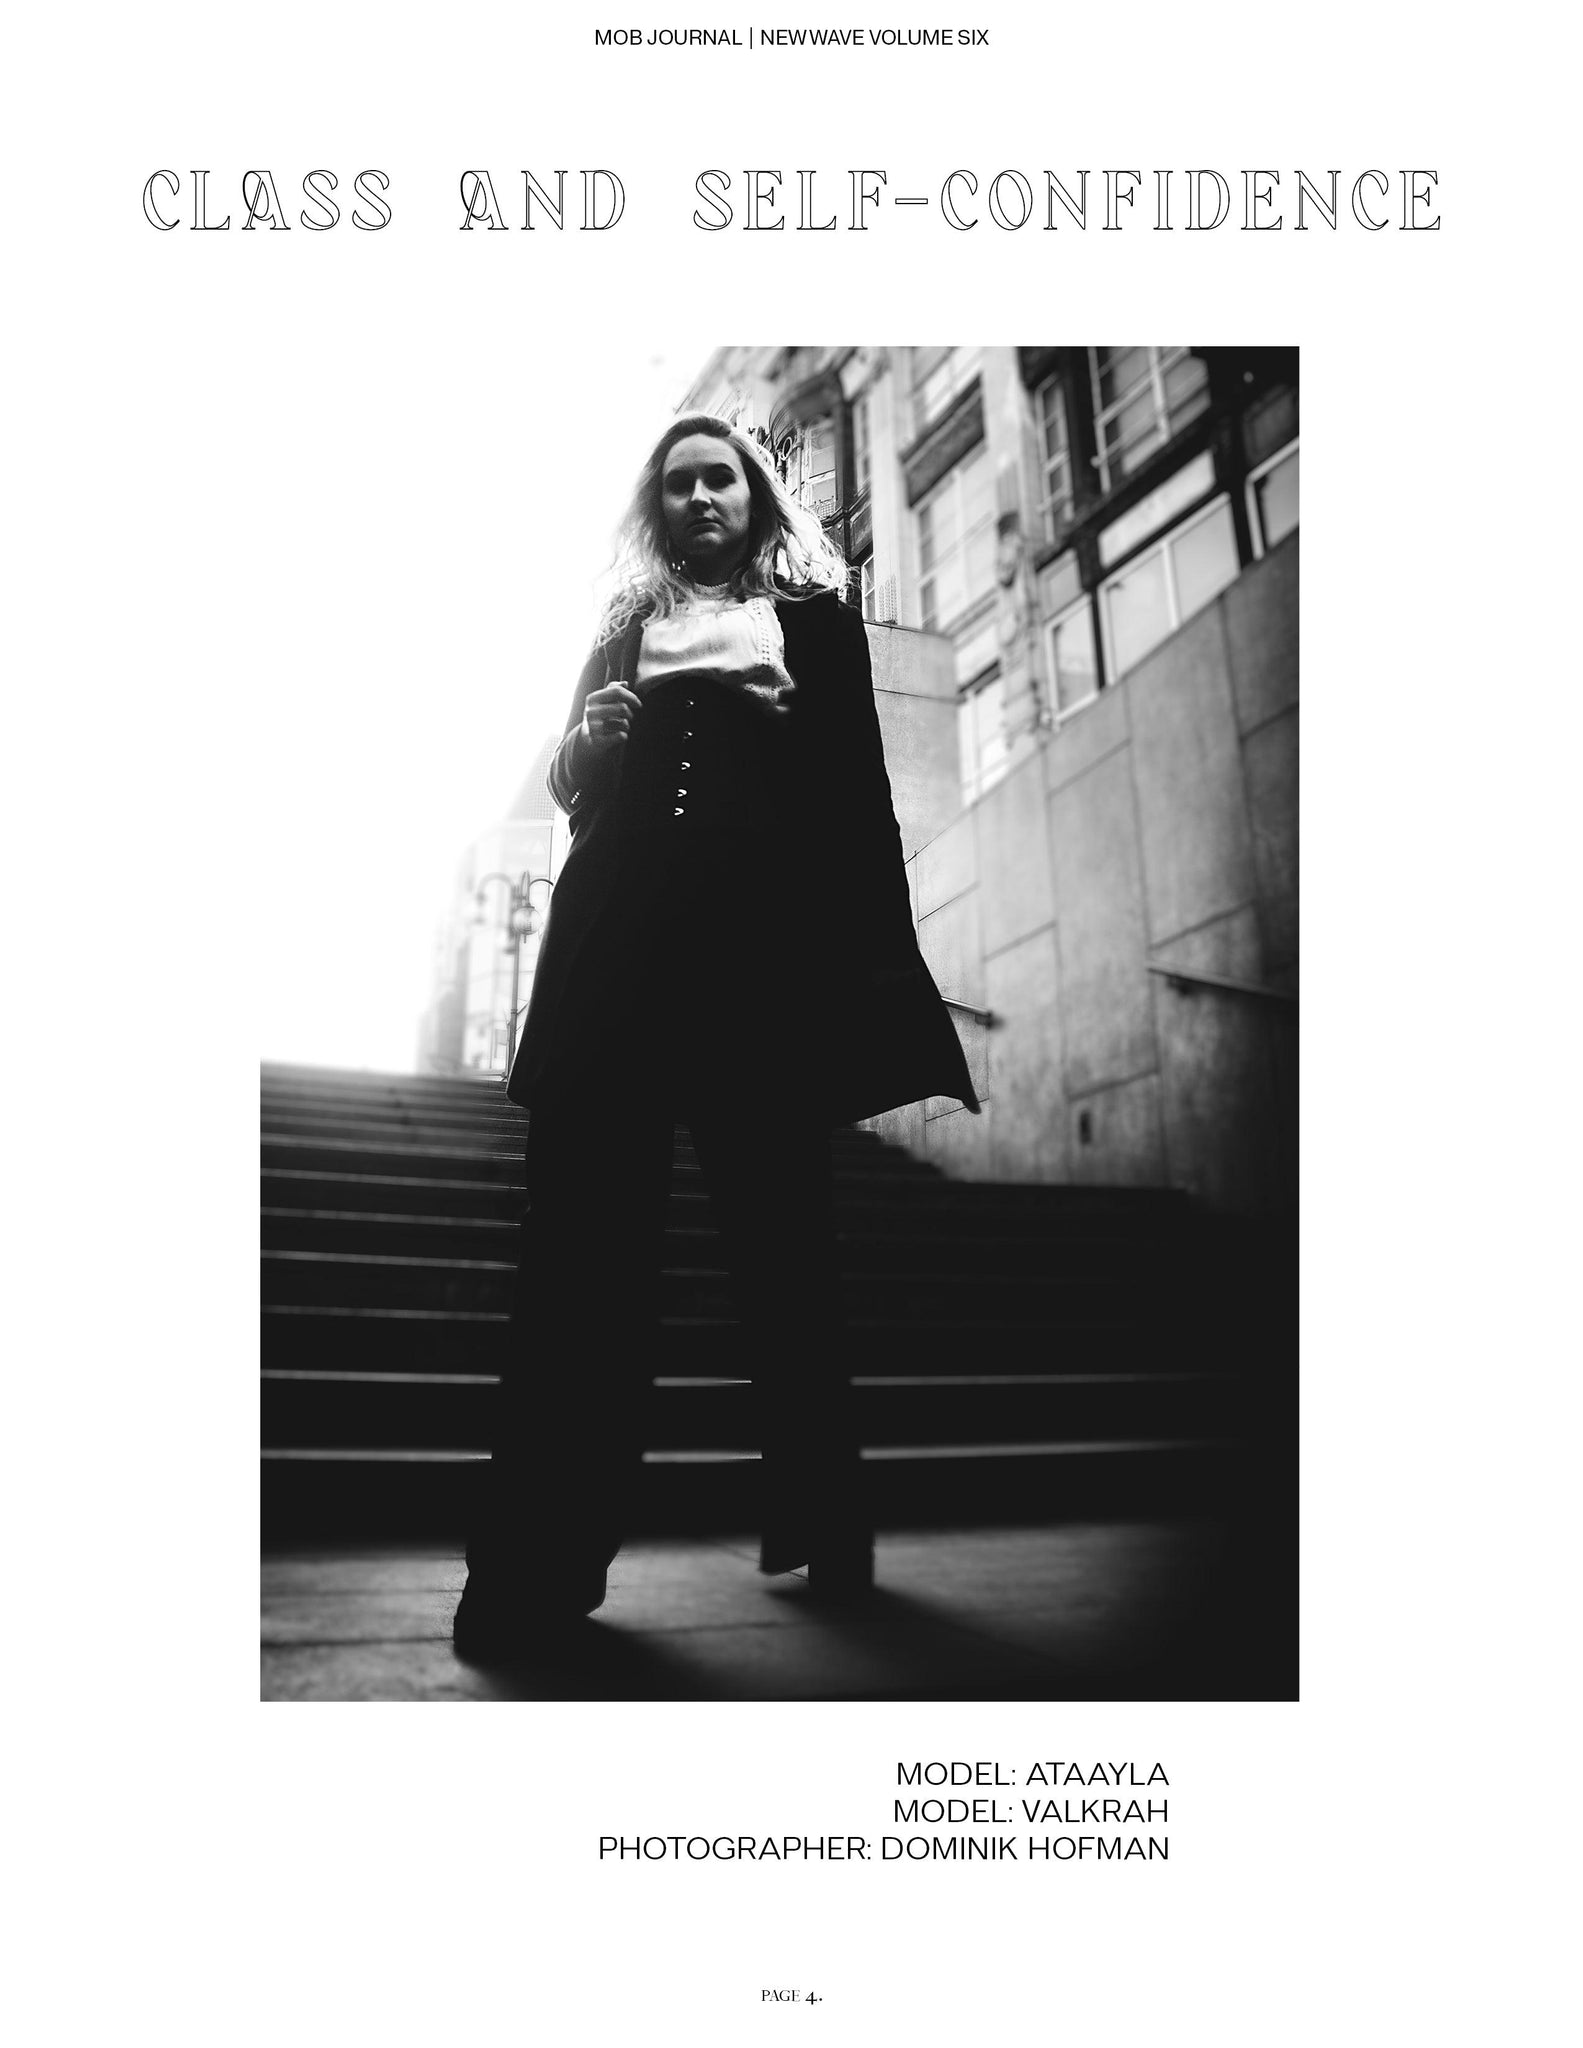 NEW WAVE | VOLUME SIX | ISSUE #31 - Mob Journal